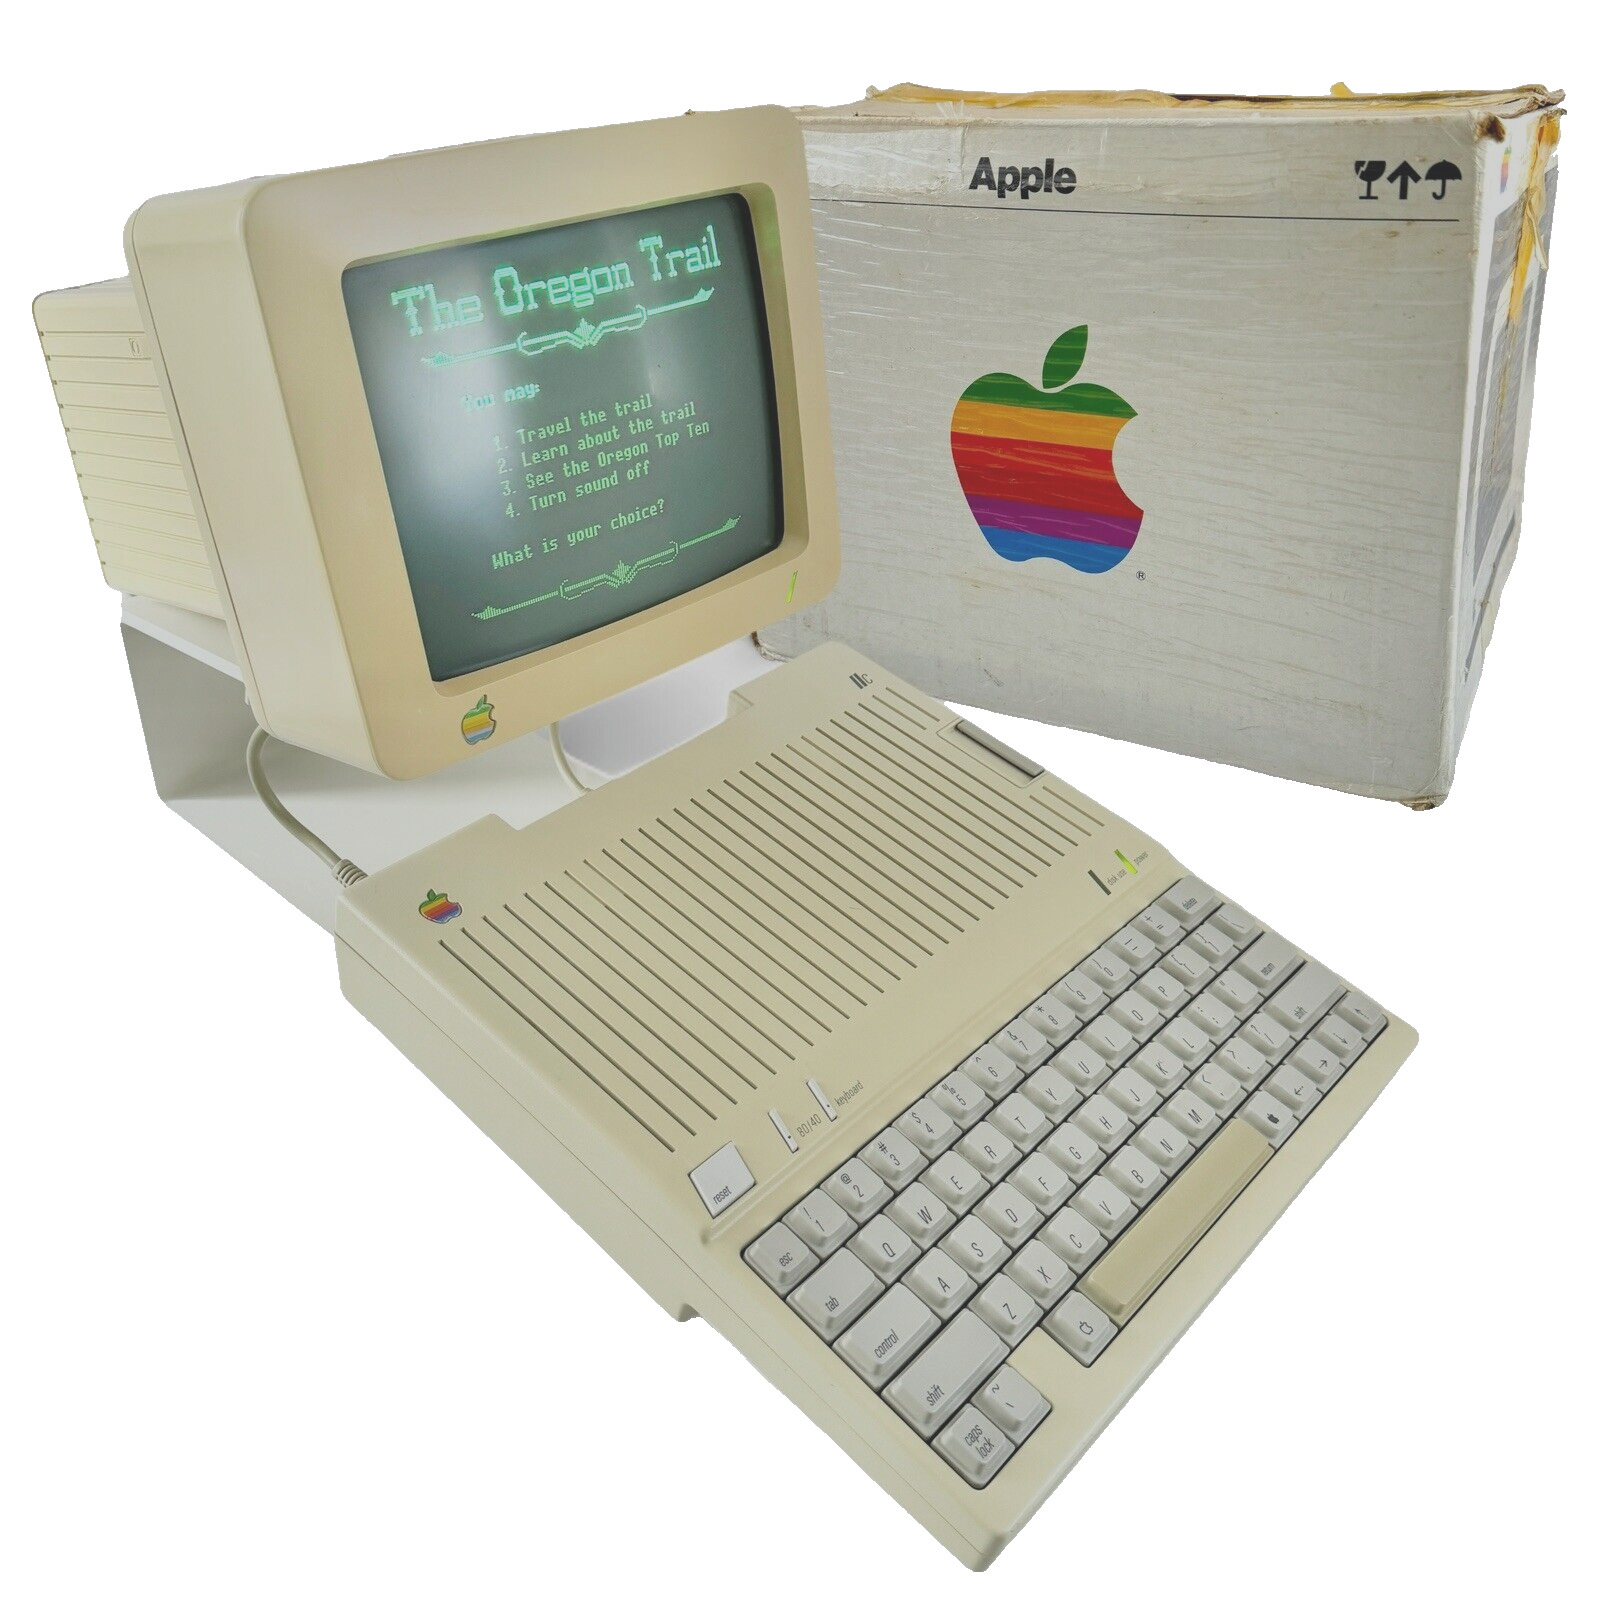 Apple IIc A2S4000 w/ Monitor A2M4090 VTG 1984 Computer WORKS